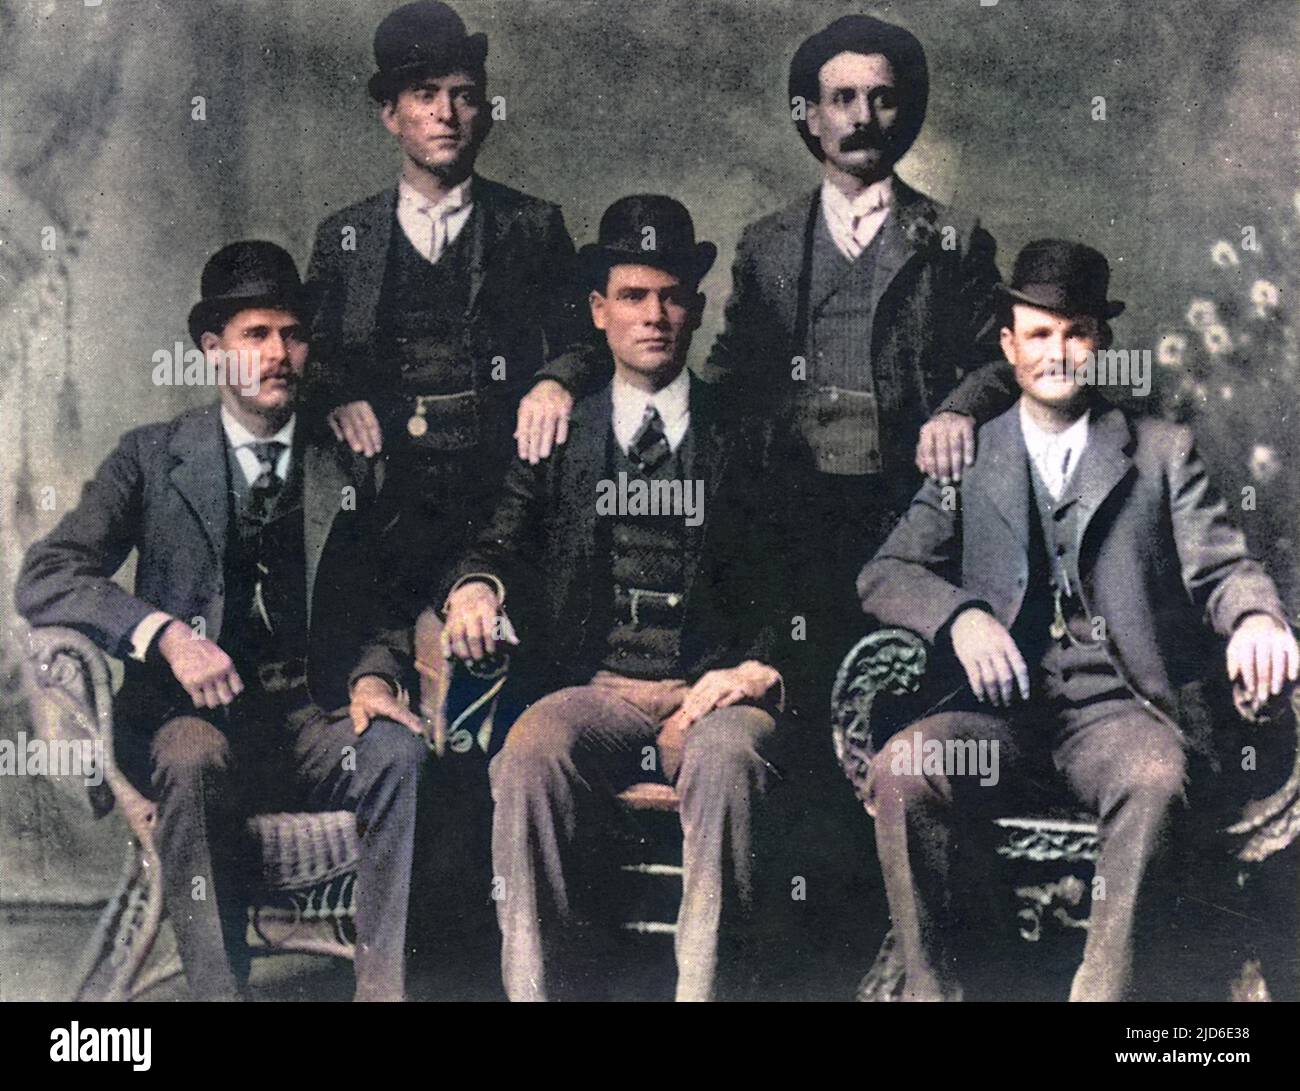 Members of The Wild Bunch in Fort Worth, Texas: sitting (l to r): Harry A Longabaugh, alias the Sundance Kid, Ben Kilpatrick, alias the Tall Texan, Robert Leroy Parker, alias Butch Cassidy; Standing (l to r): Will Carver, alias News Carver and Harvey Logan, alias Kid Curry. Colourised version of : 10513812       Date: 1900 Stock Photo